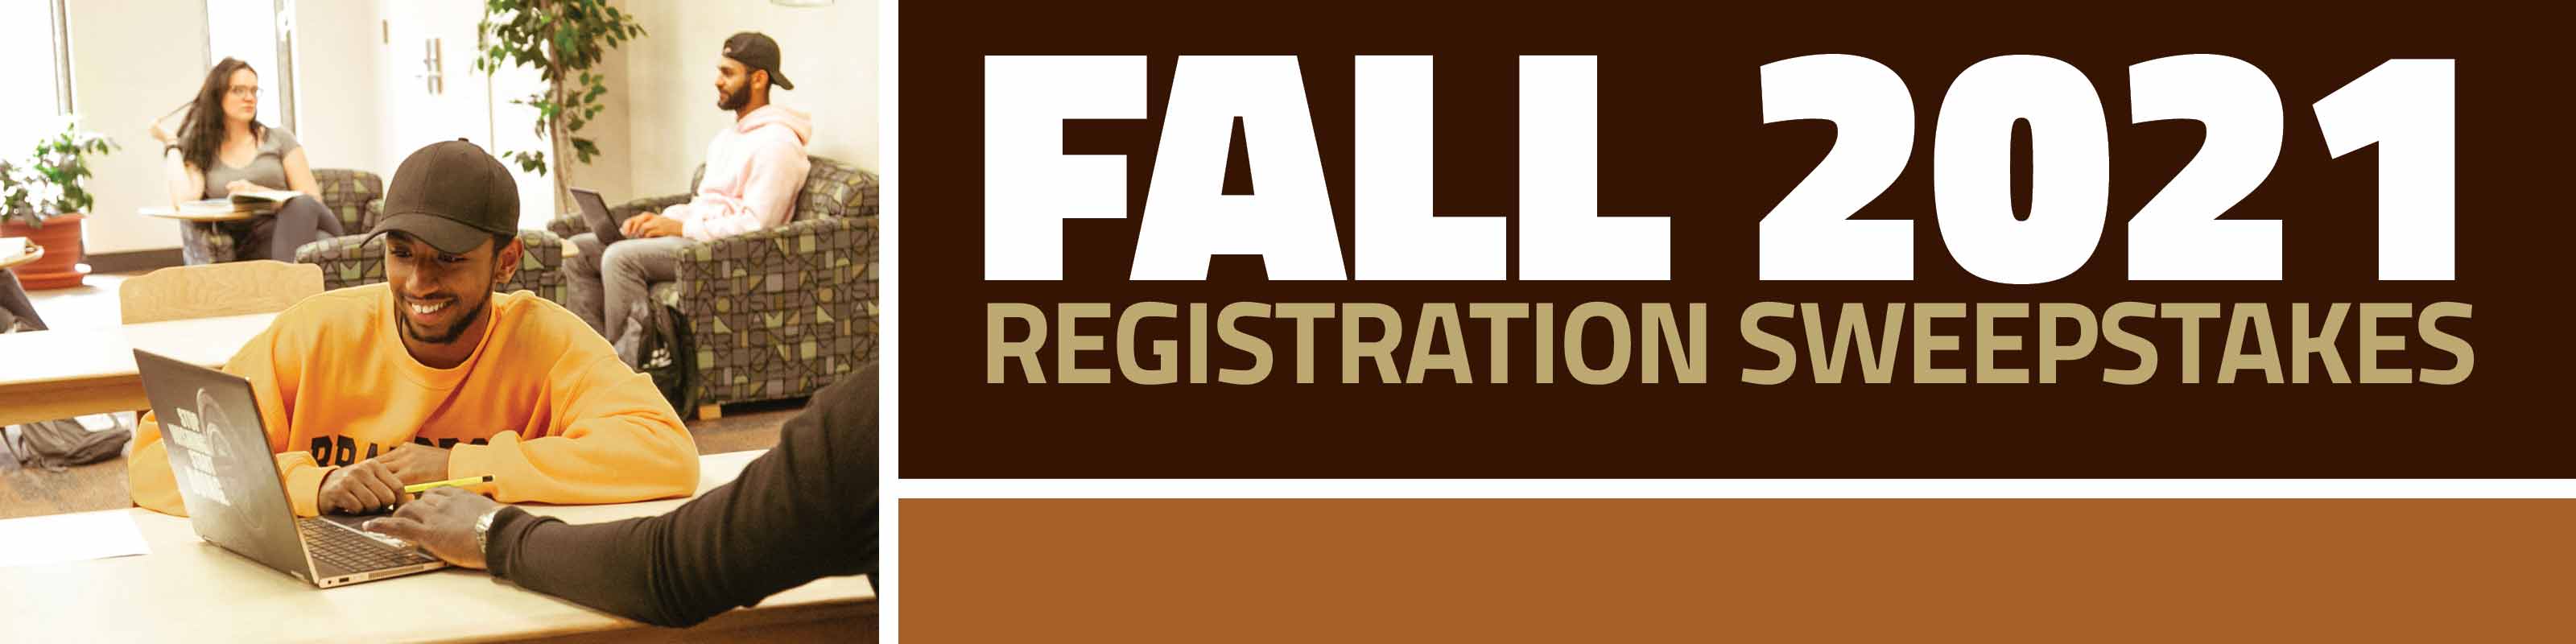 FALL 2021 Registration Sweepstakes